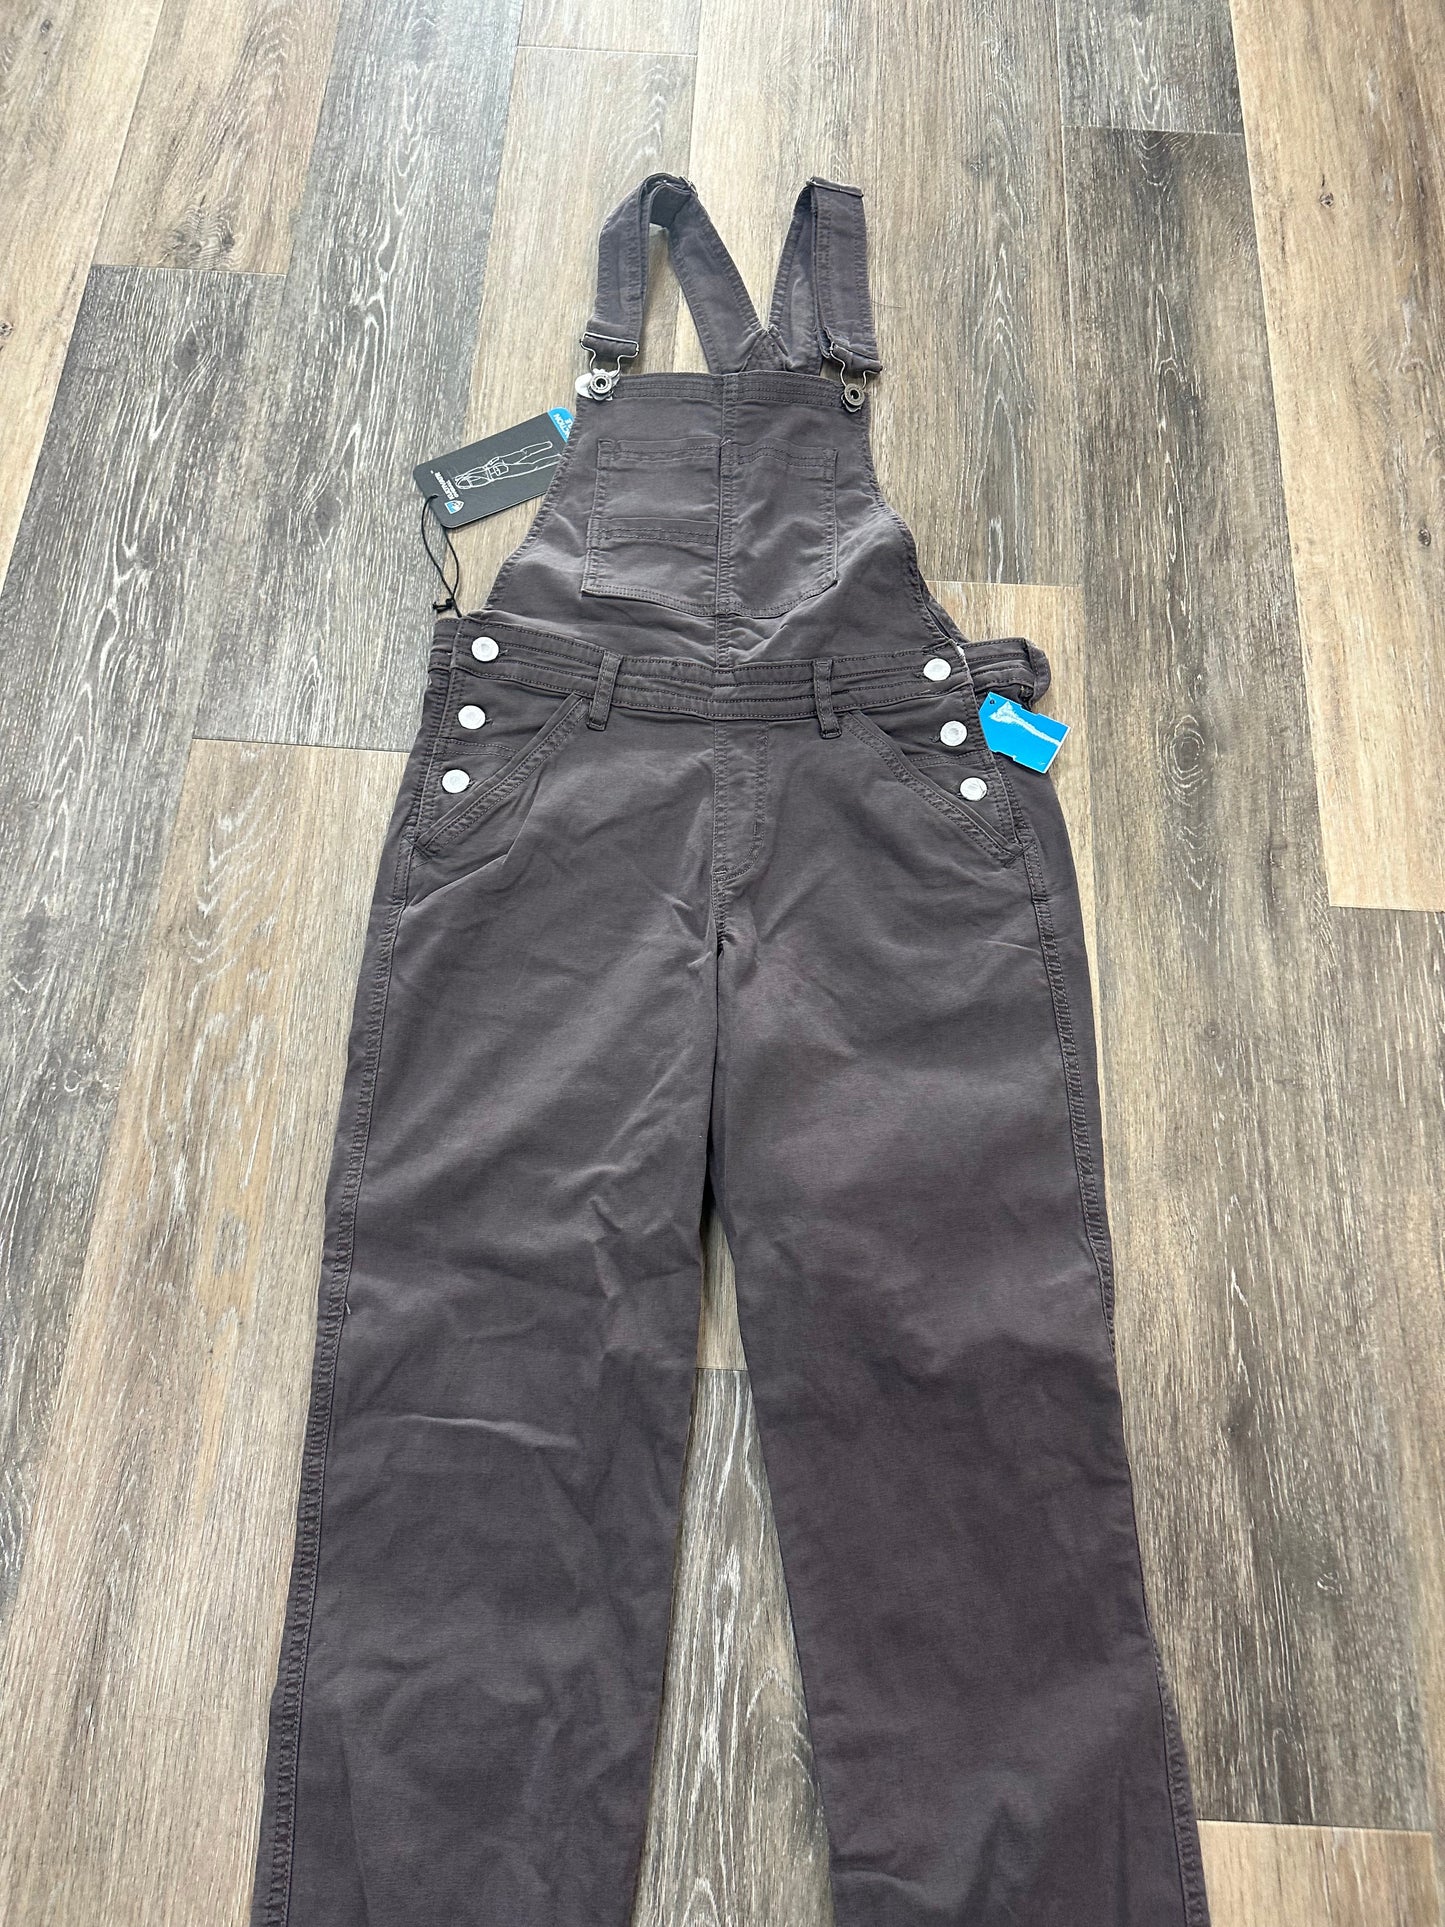 Brown Overalls Kuhl, Size 4